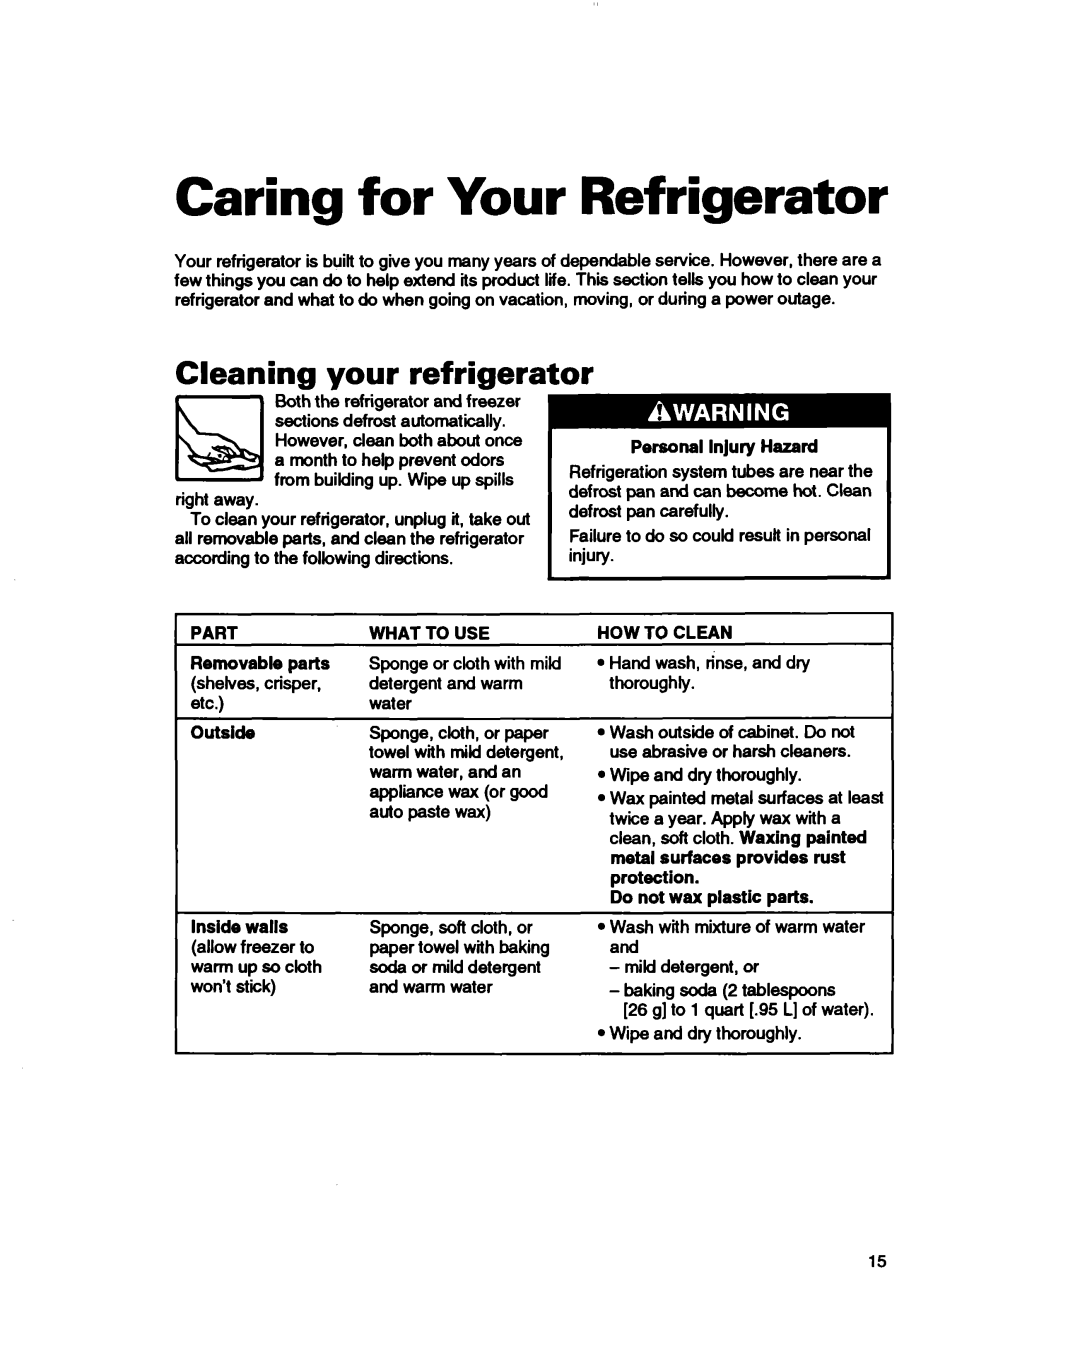 Roper RT18EK Caring for Your Refrigerator, Cleaning your refrigerator, Personal Injury Hazard, Part, What To Use, outside 